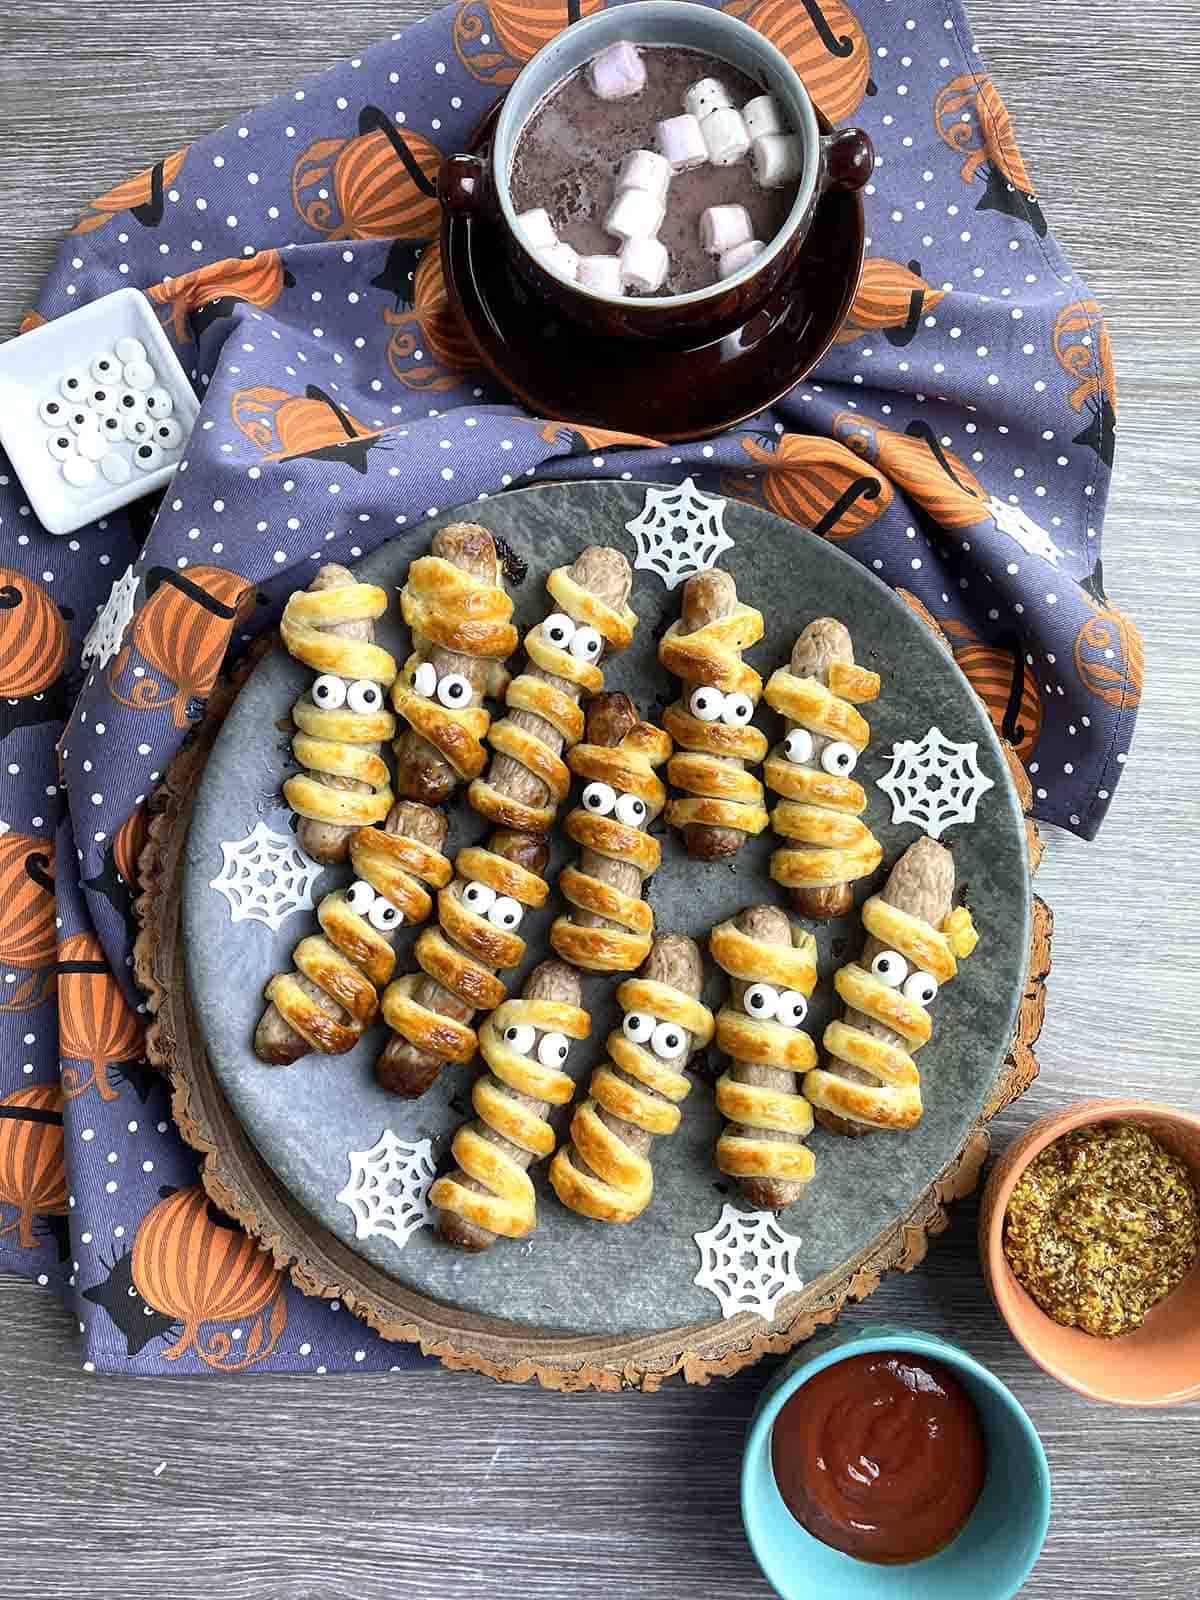 Halloween sausage rolls on a plate.